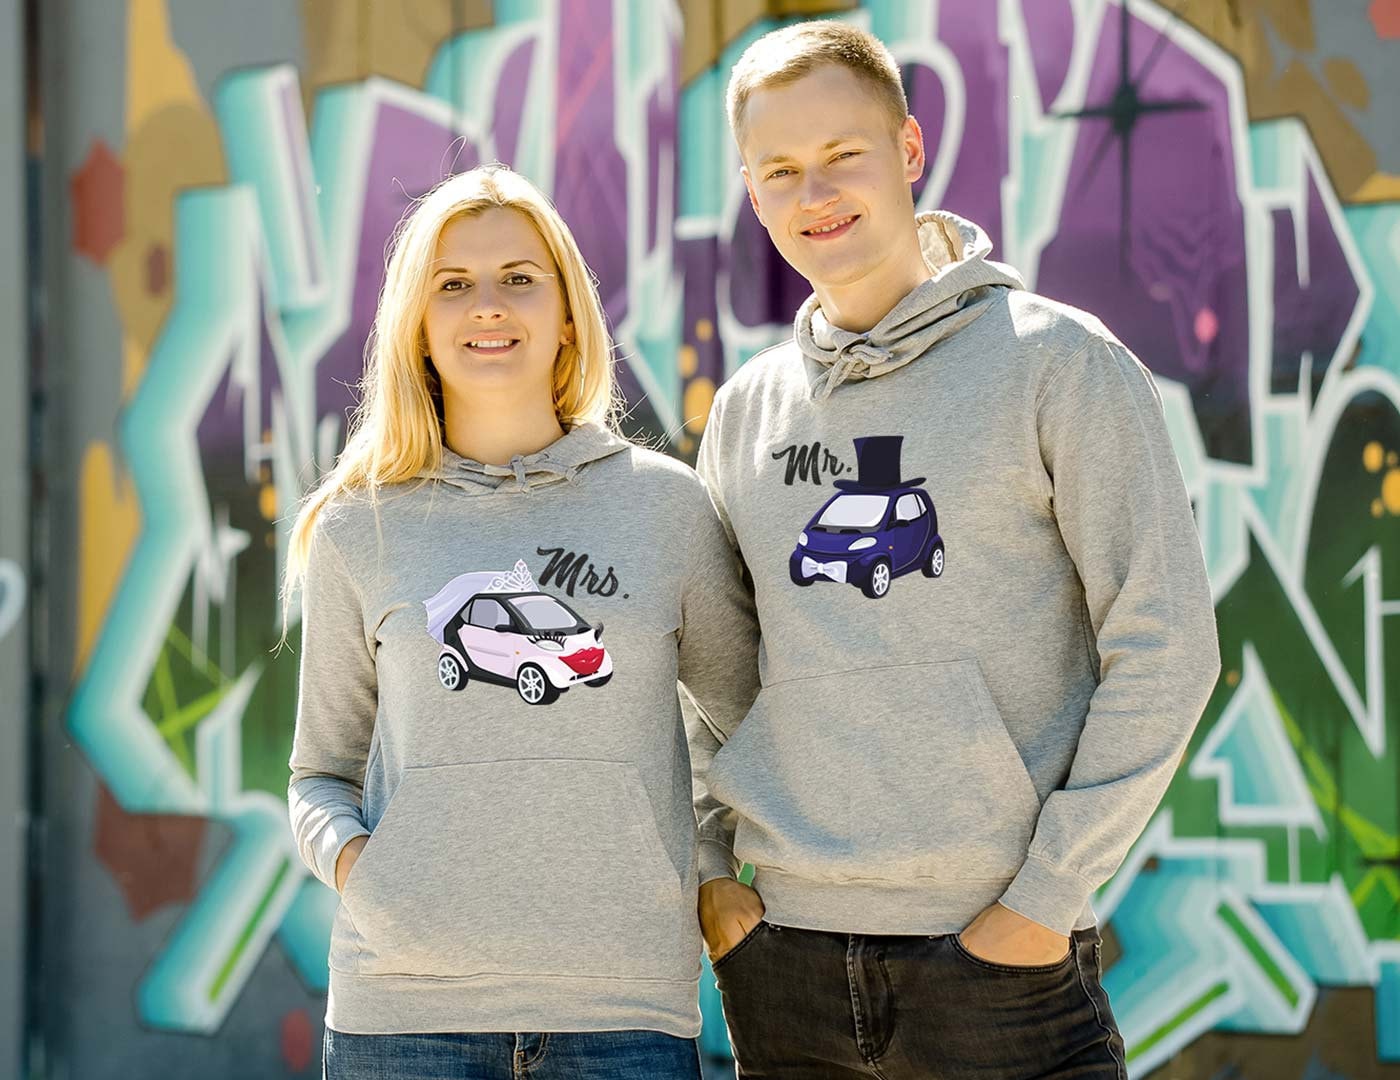 Cars Couple Hoodies - Matching Couple Hoodies - Couple Sweaters - Mr and Mrs Hoodies - Set of Sweatshirts - His and Hers - Made by VIVAMAKE